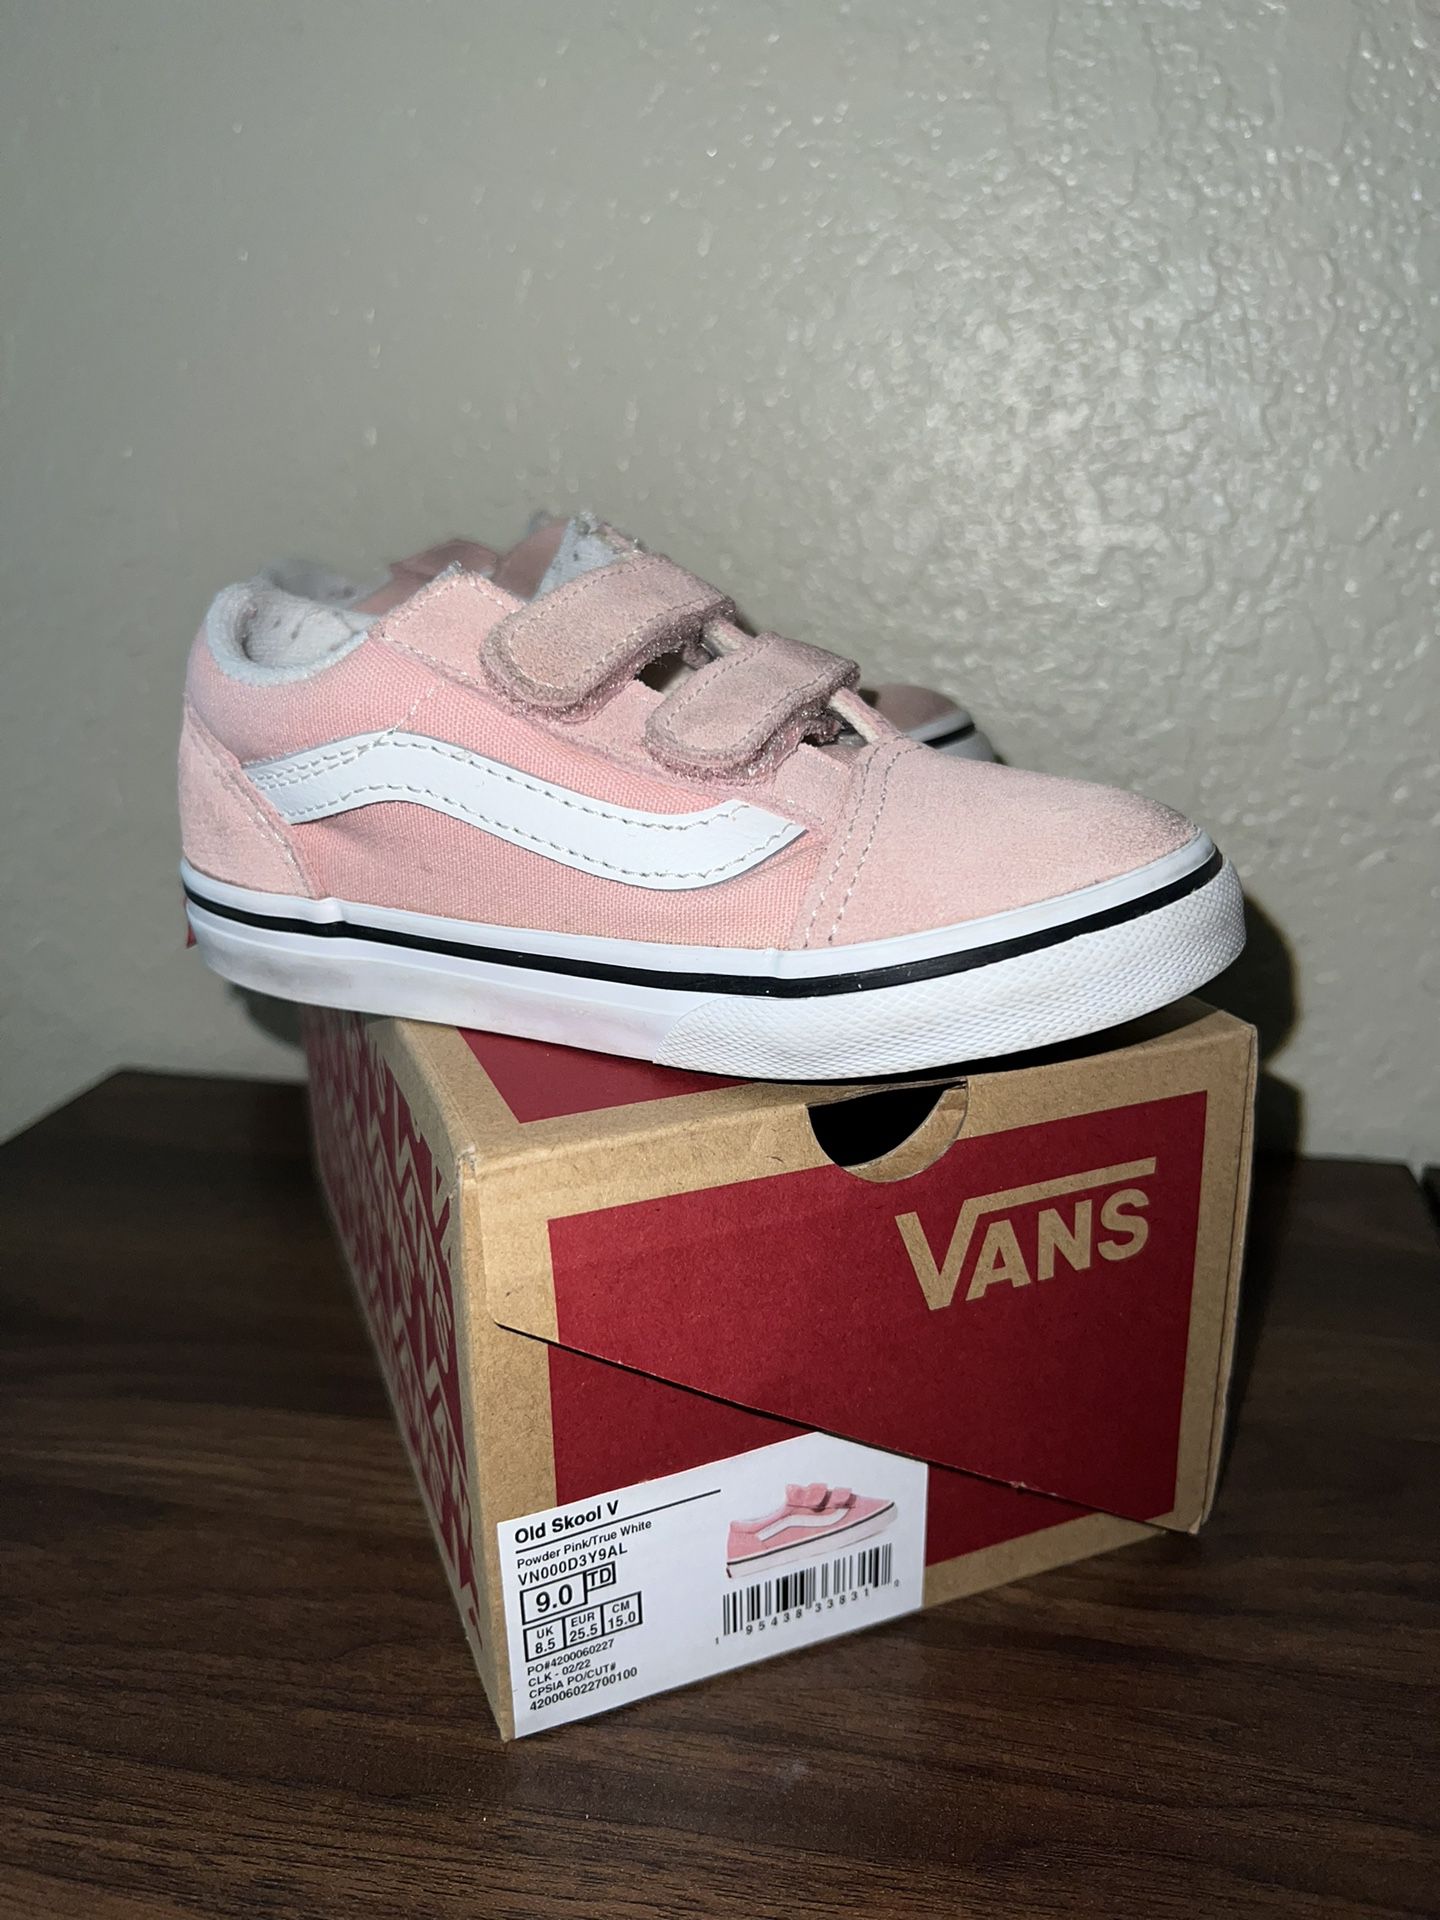 Used Toddler Vans Size 9 - $5